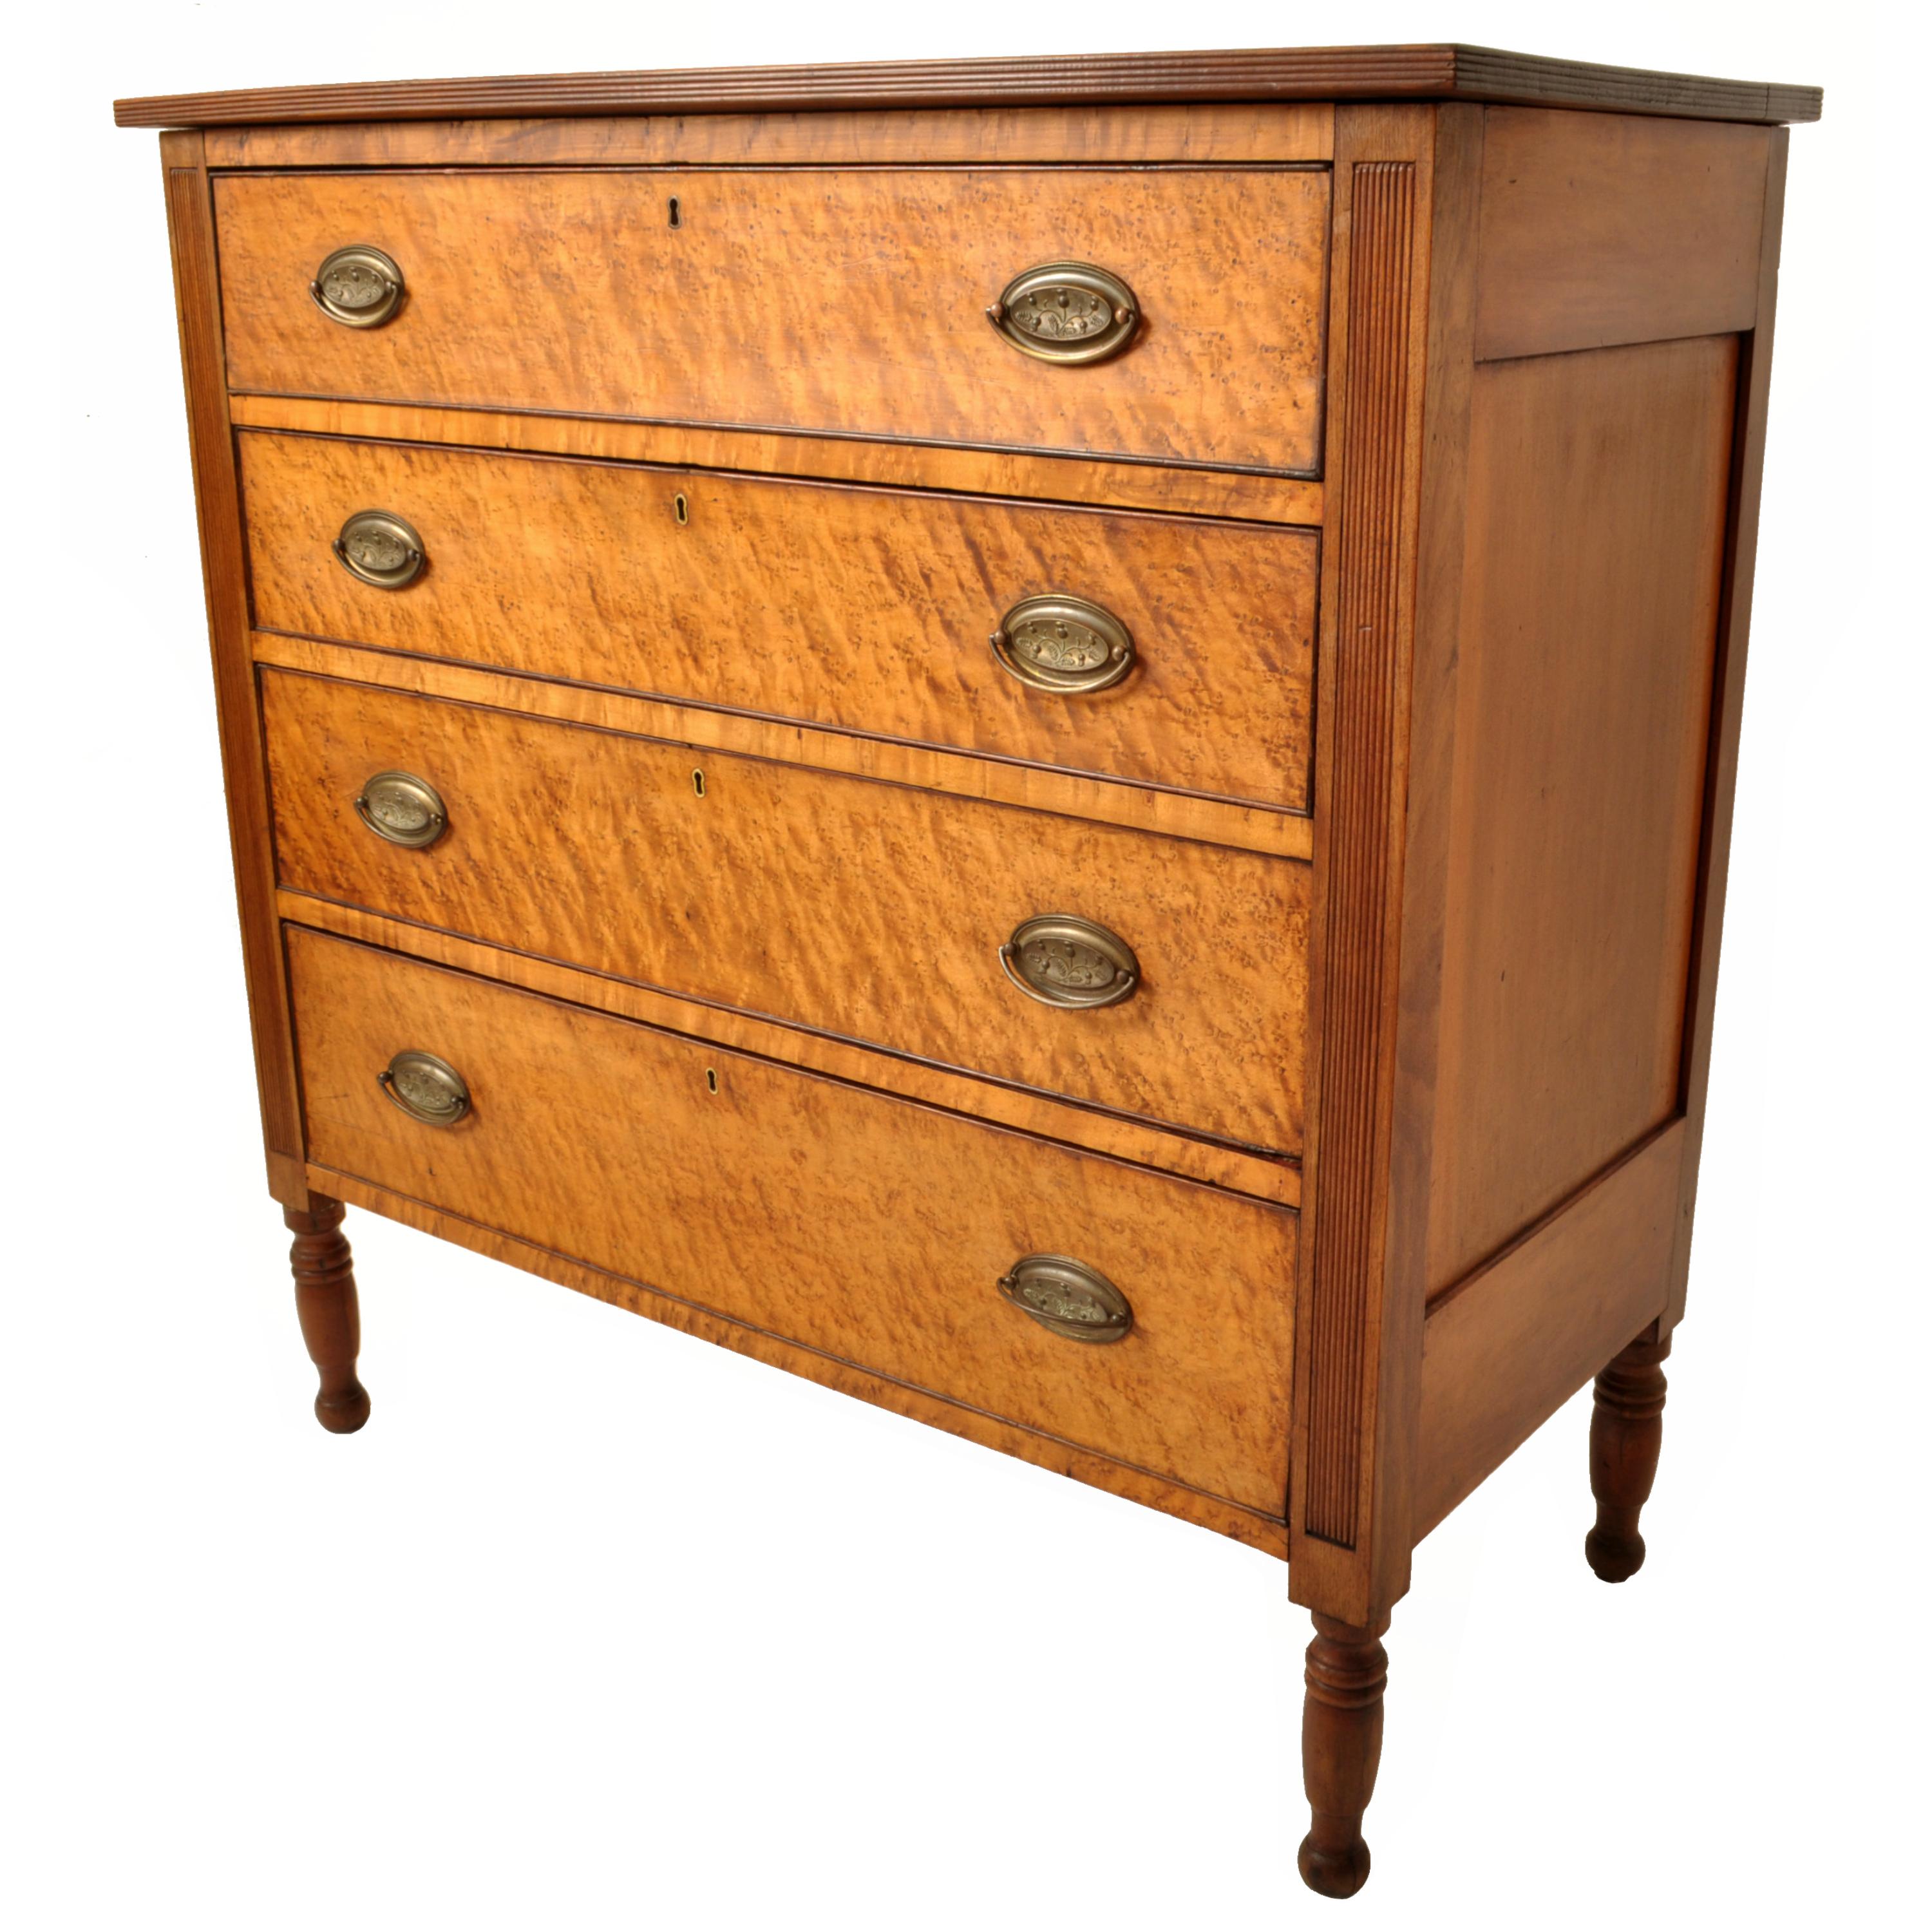 A good antique American New England Federal period 'Tiger' maple and cherry chest of four drawers/dresser in the Sheraton style, Vermont, circa 1825.
The four drawer chest with a cherry carcass and 'Tiger' maple drawer fronts, the chest having a